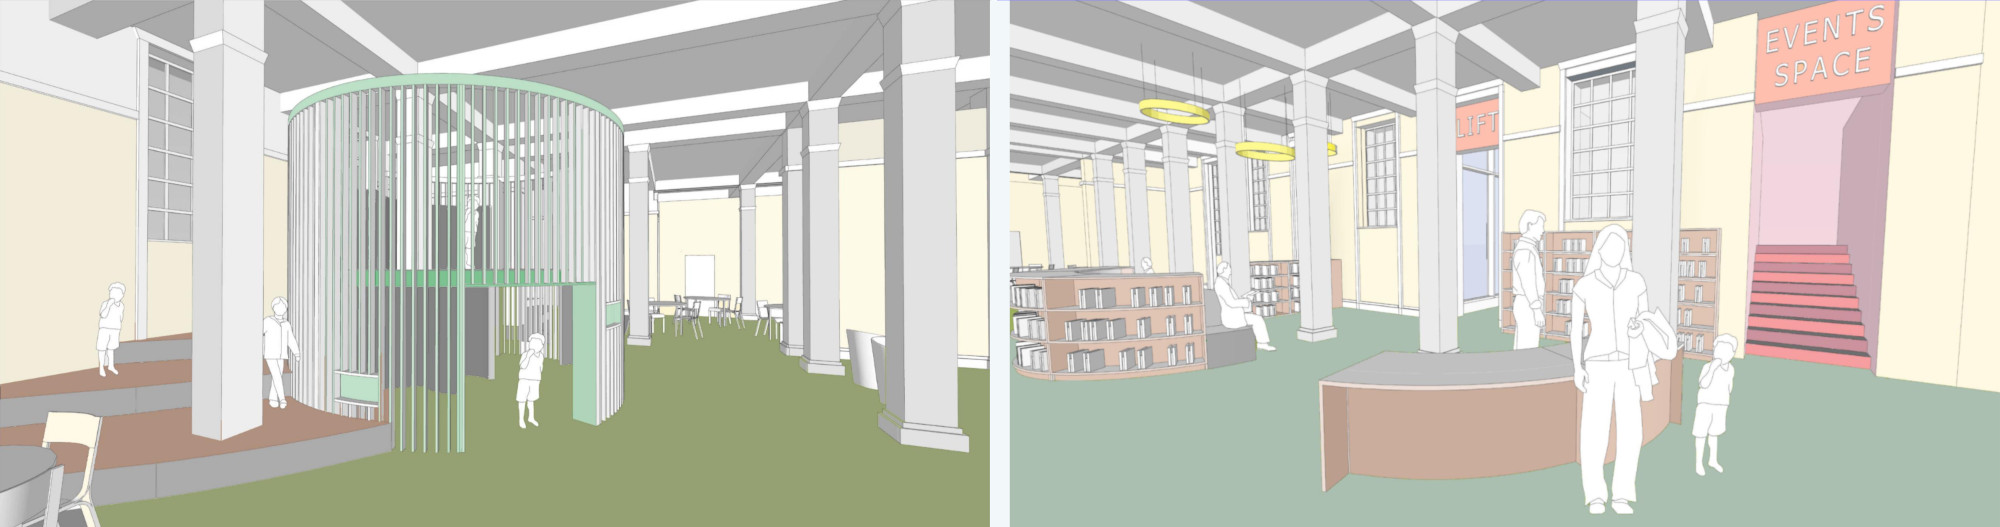 Artist's impressions of the renovations at Central Library